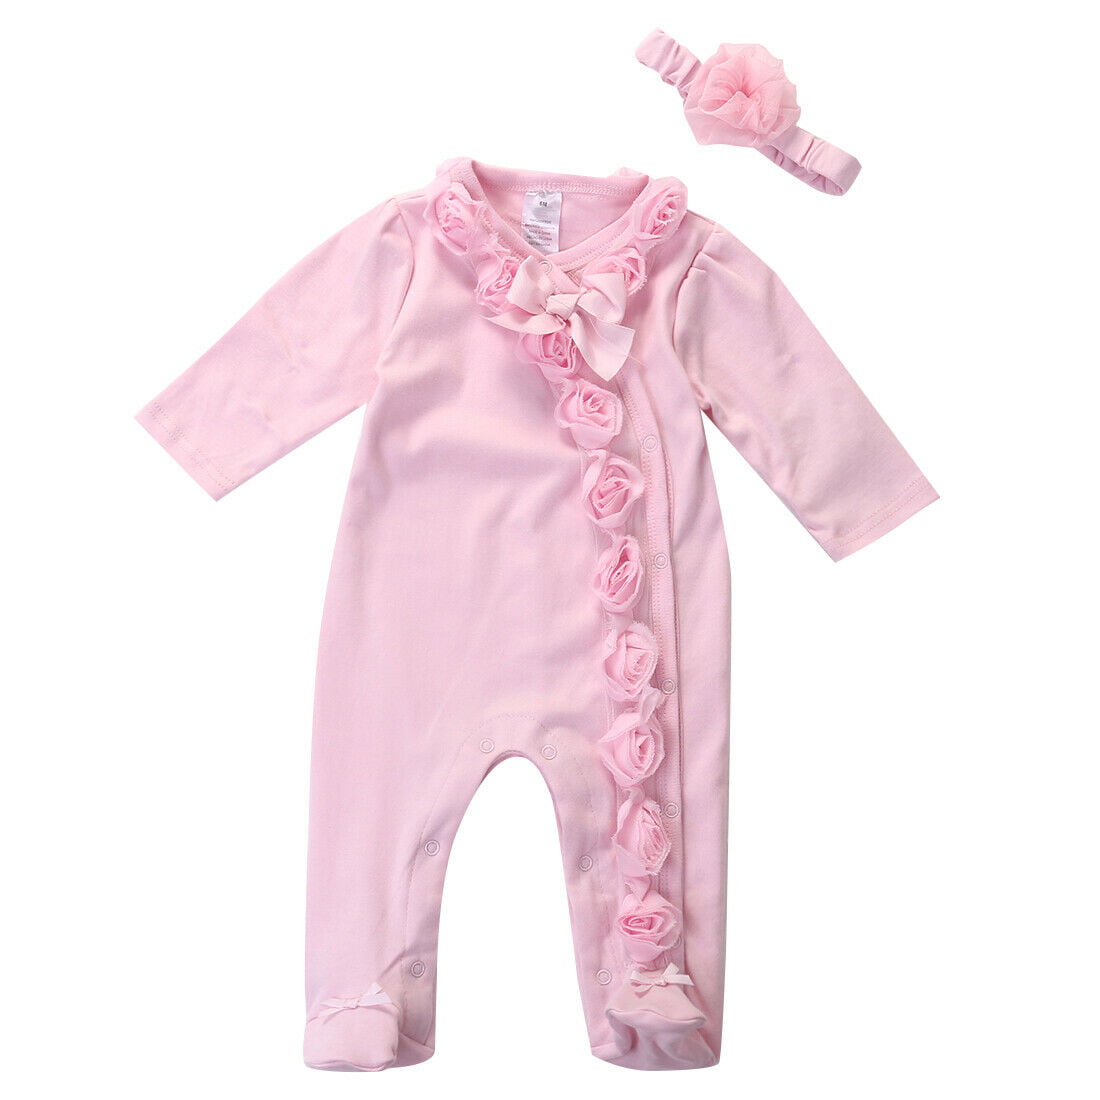 Newborn Infant Baby Girls Long Sleeve Floral Romper Jumpsuit+Headband Outfits